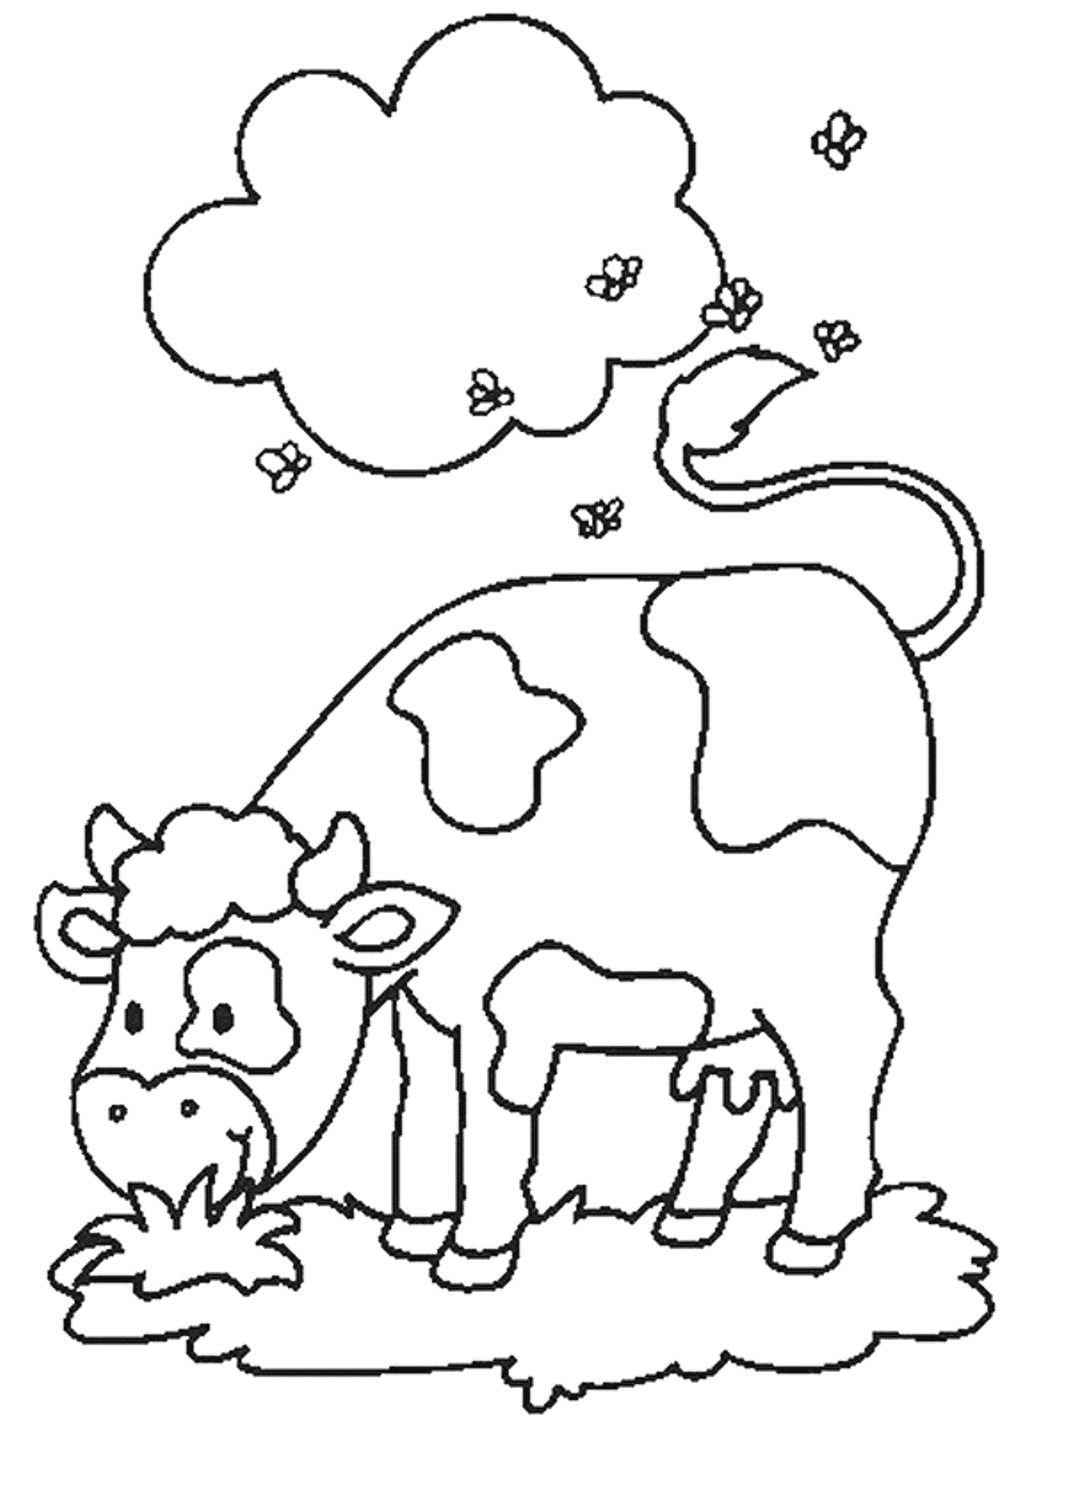 baby cow coloring pages for kids Coloring4free - Coloring4Free.com